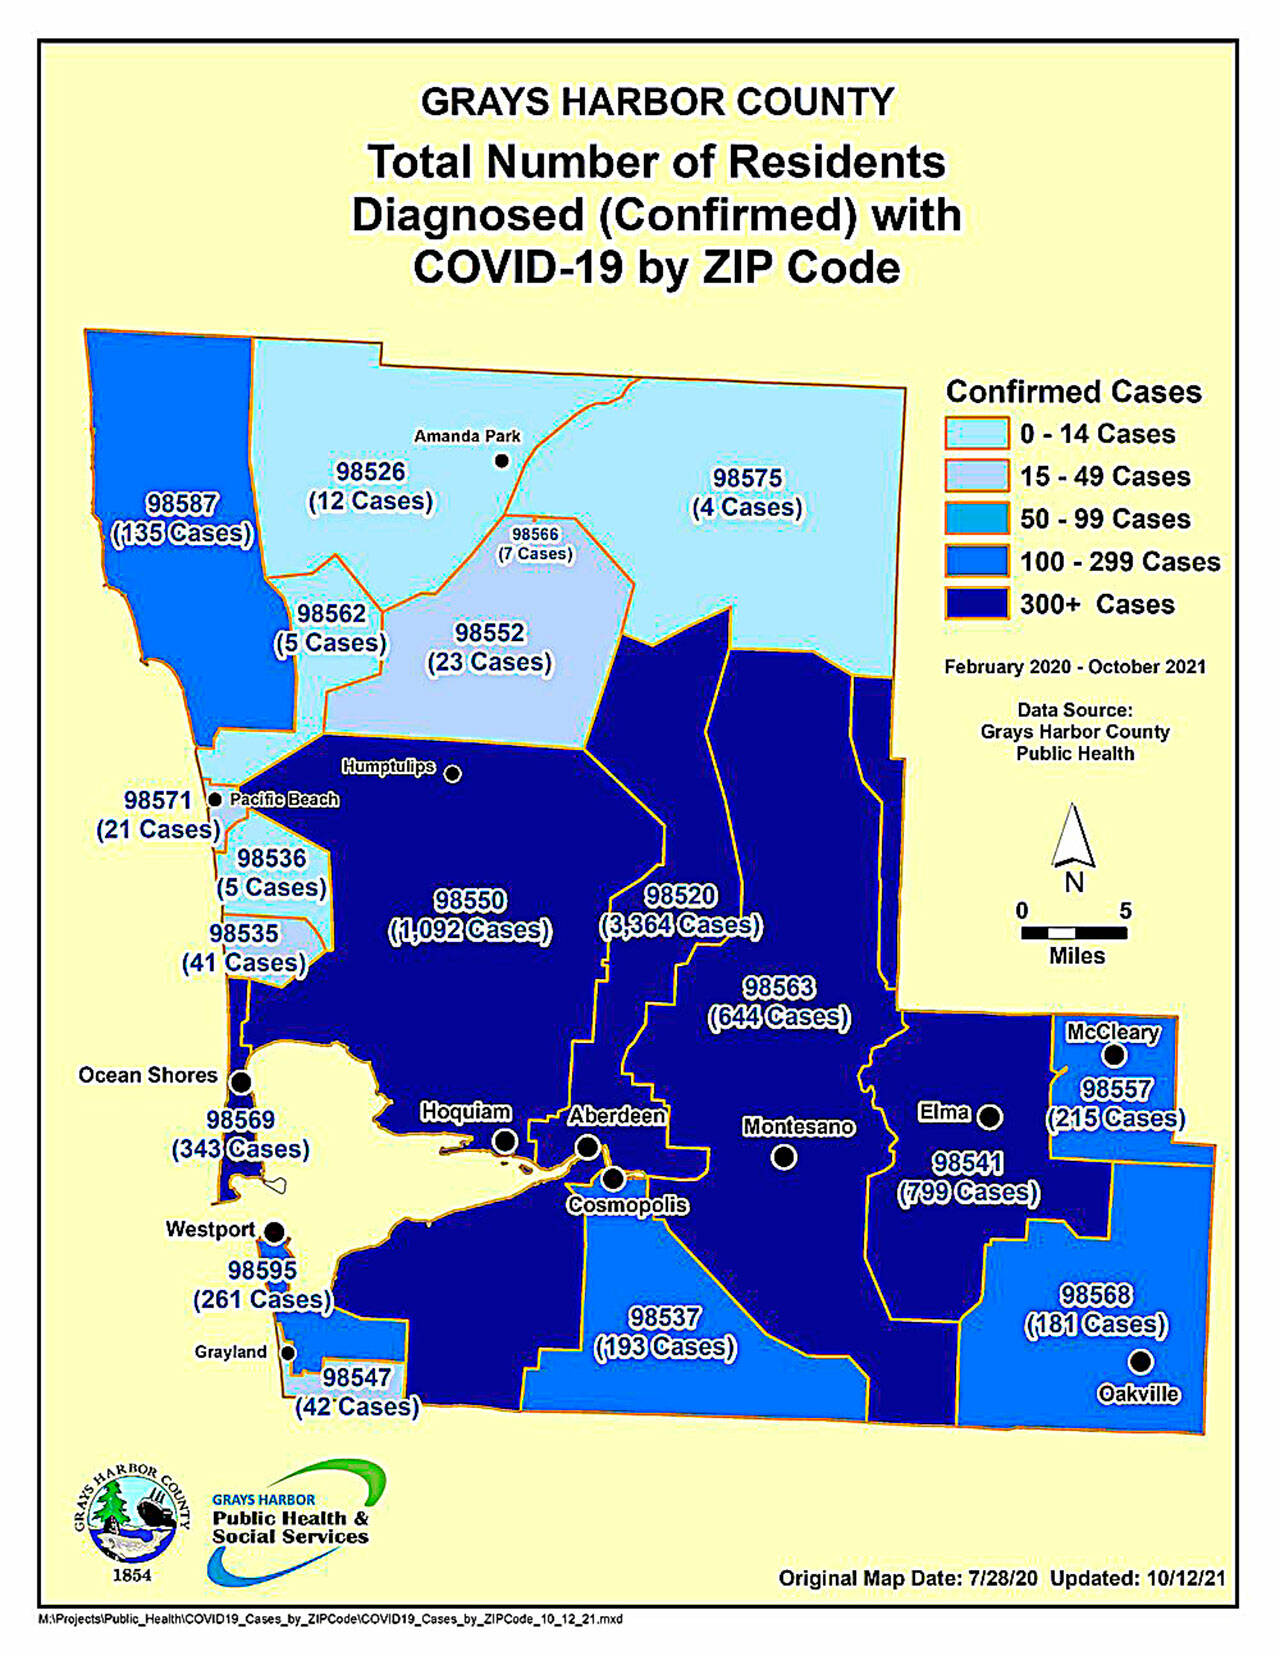 Courtesy of Grays Harbor County Public Health
COVID cases for the duration of the pandemic in Grays Harbor County by ZIP code, updated Oct. 12, 2021.